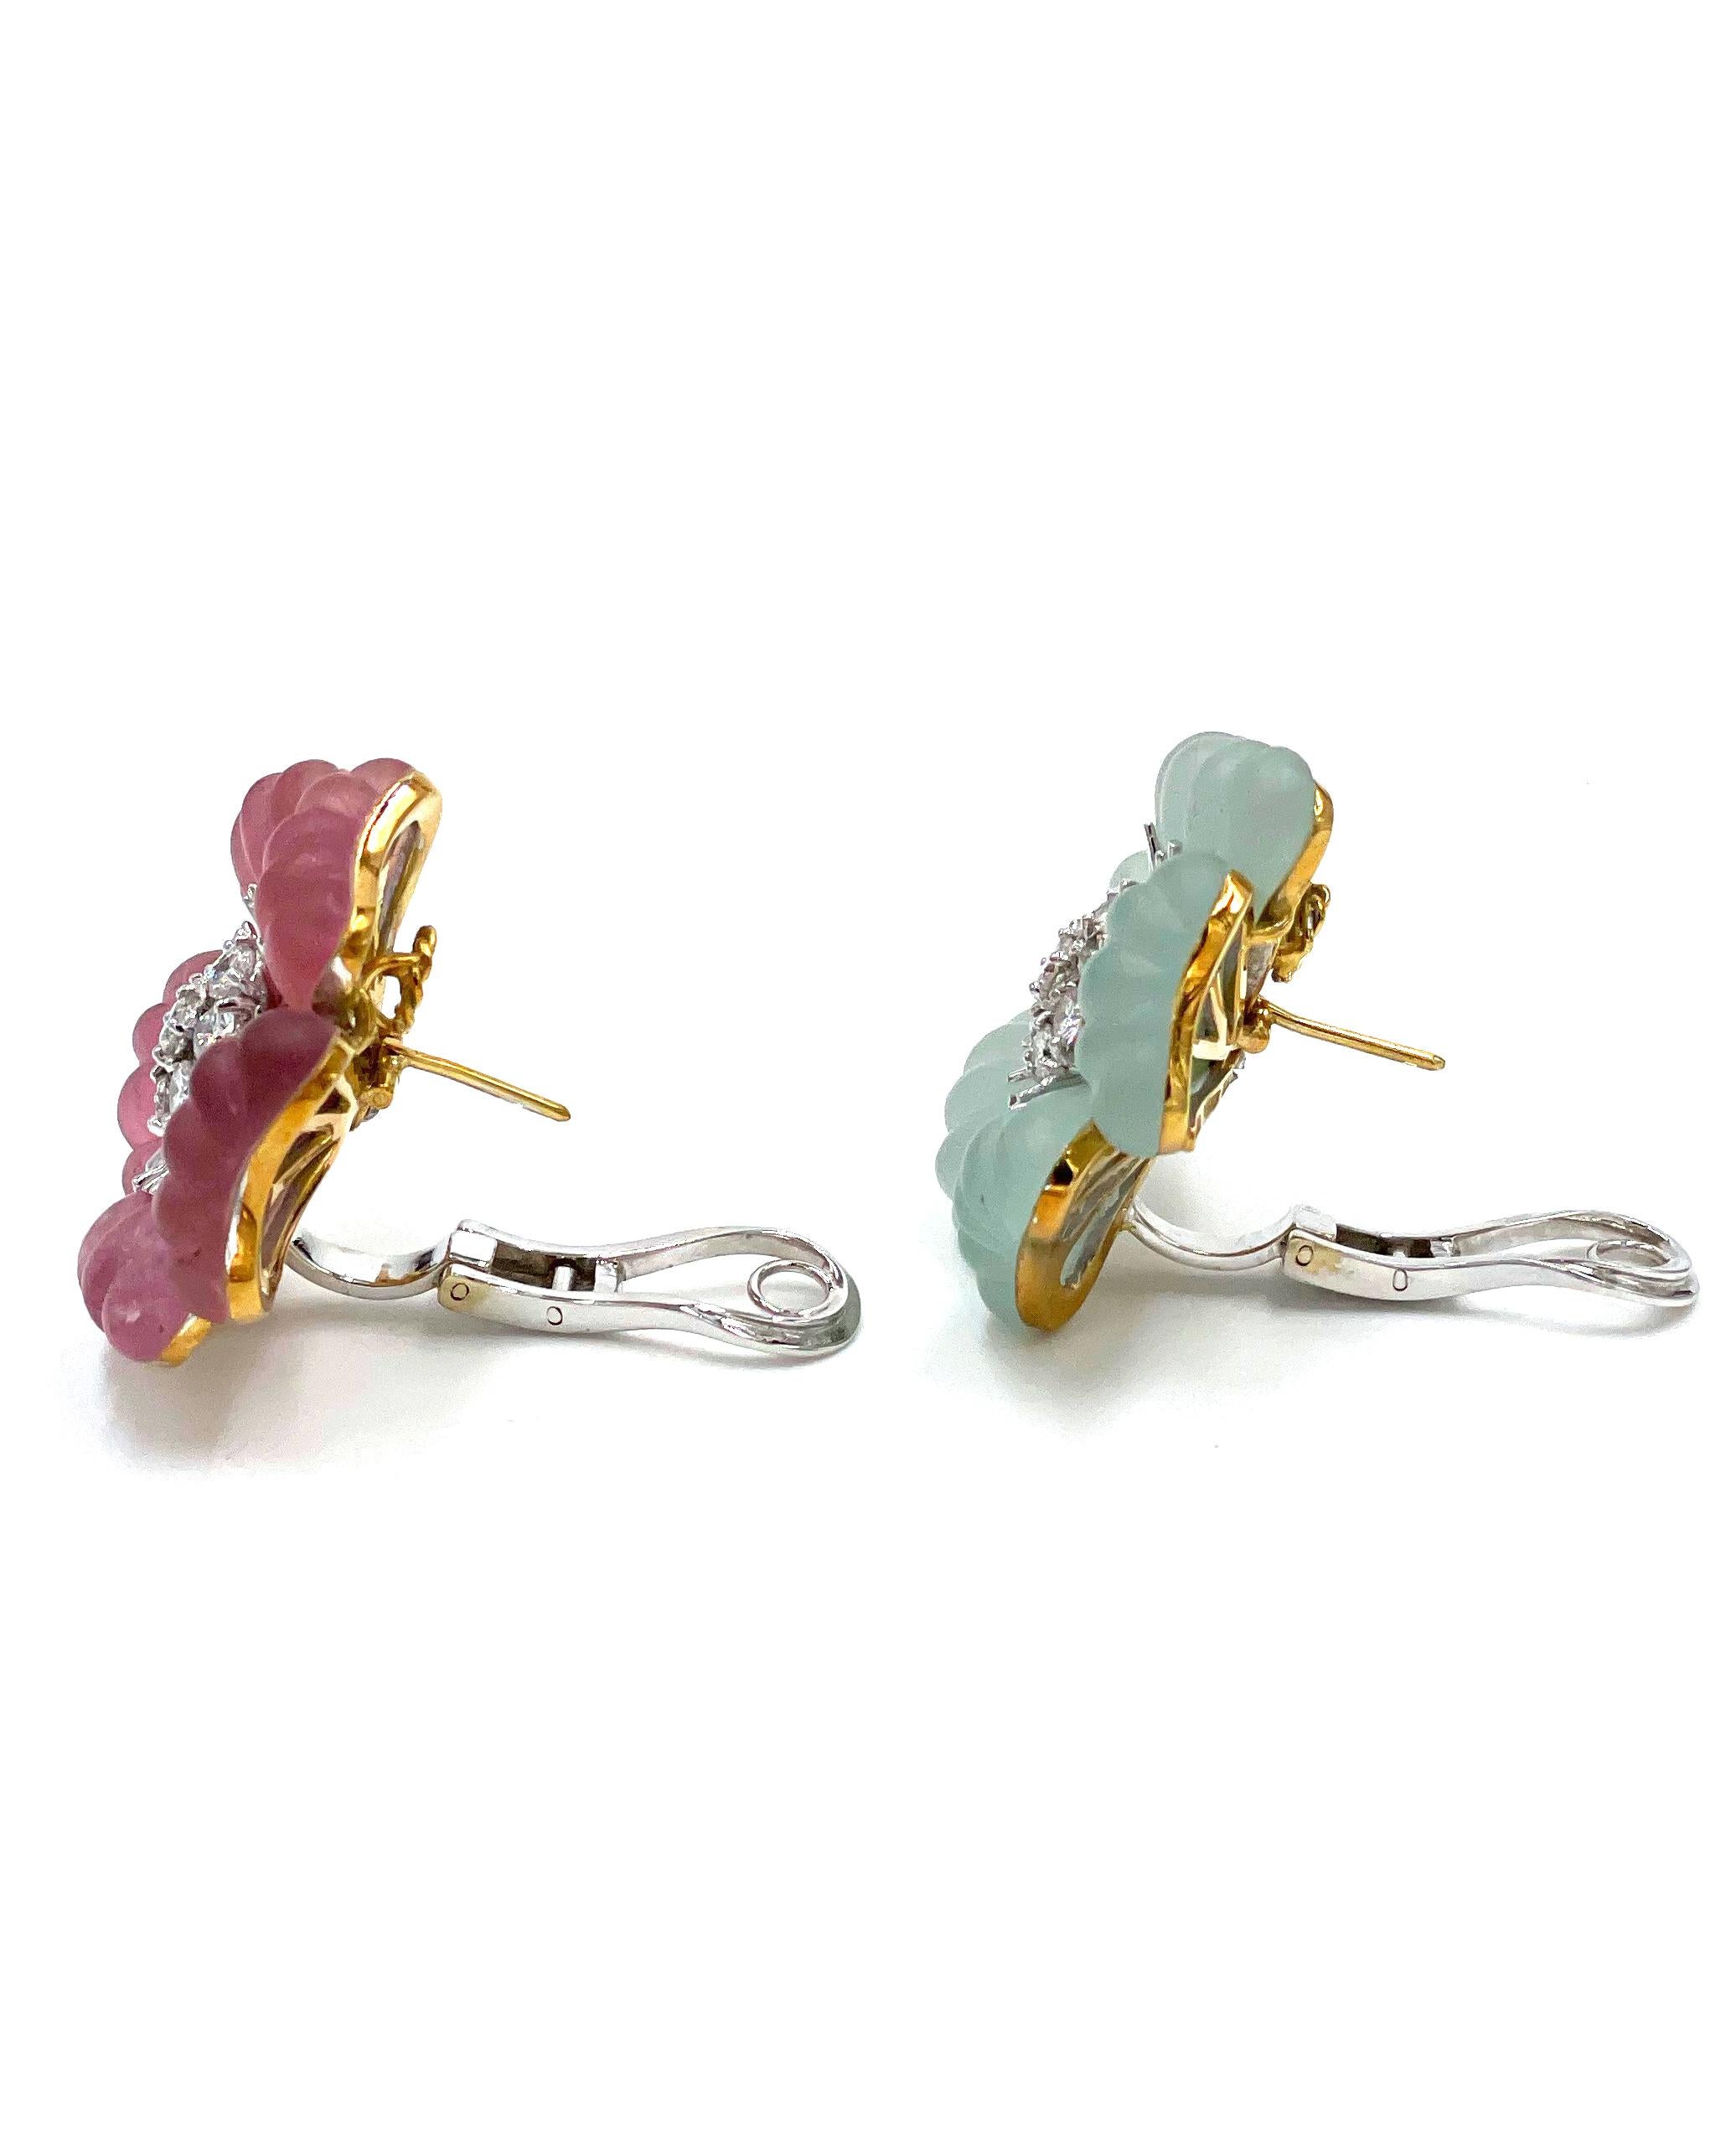 Pre owned vintage estate Ambrosi 18K white and yellow gold one of a kind aquamarine, pink tourmaline and diamond floral earrings.  One earring is pink tourmaline and the other is aquamarine.  Each earrings is a flower carved from aquamarine and